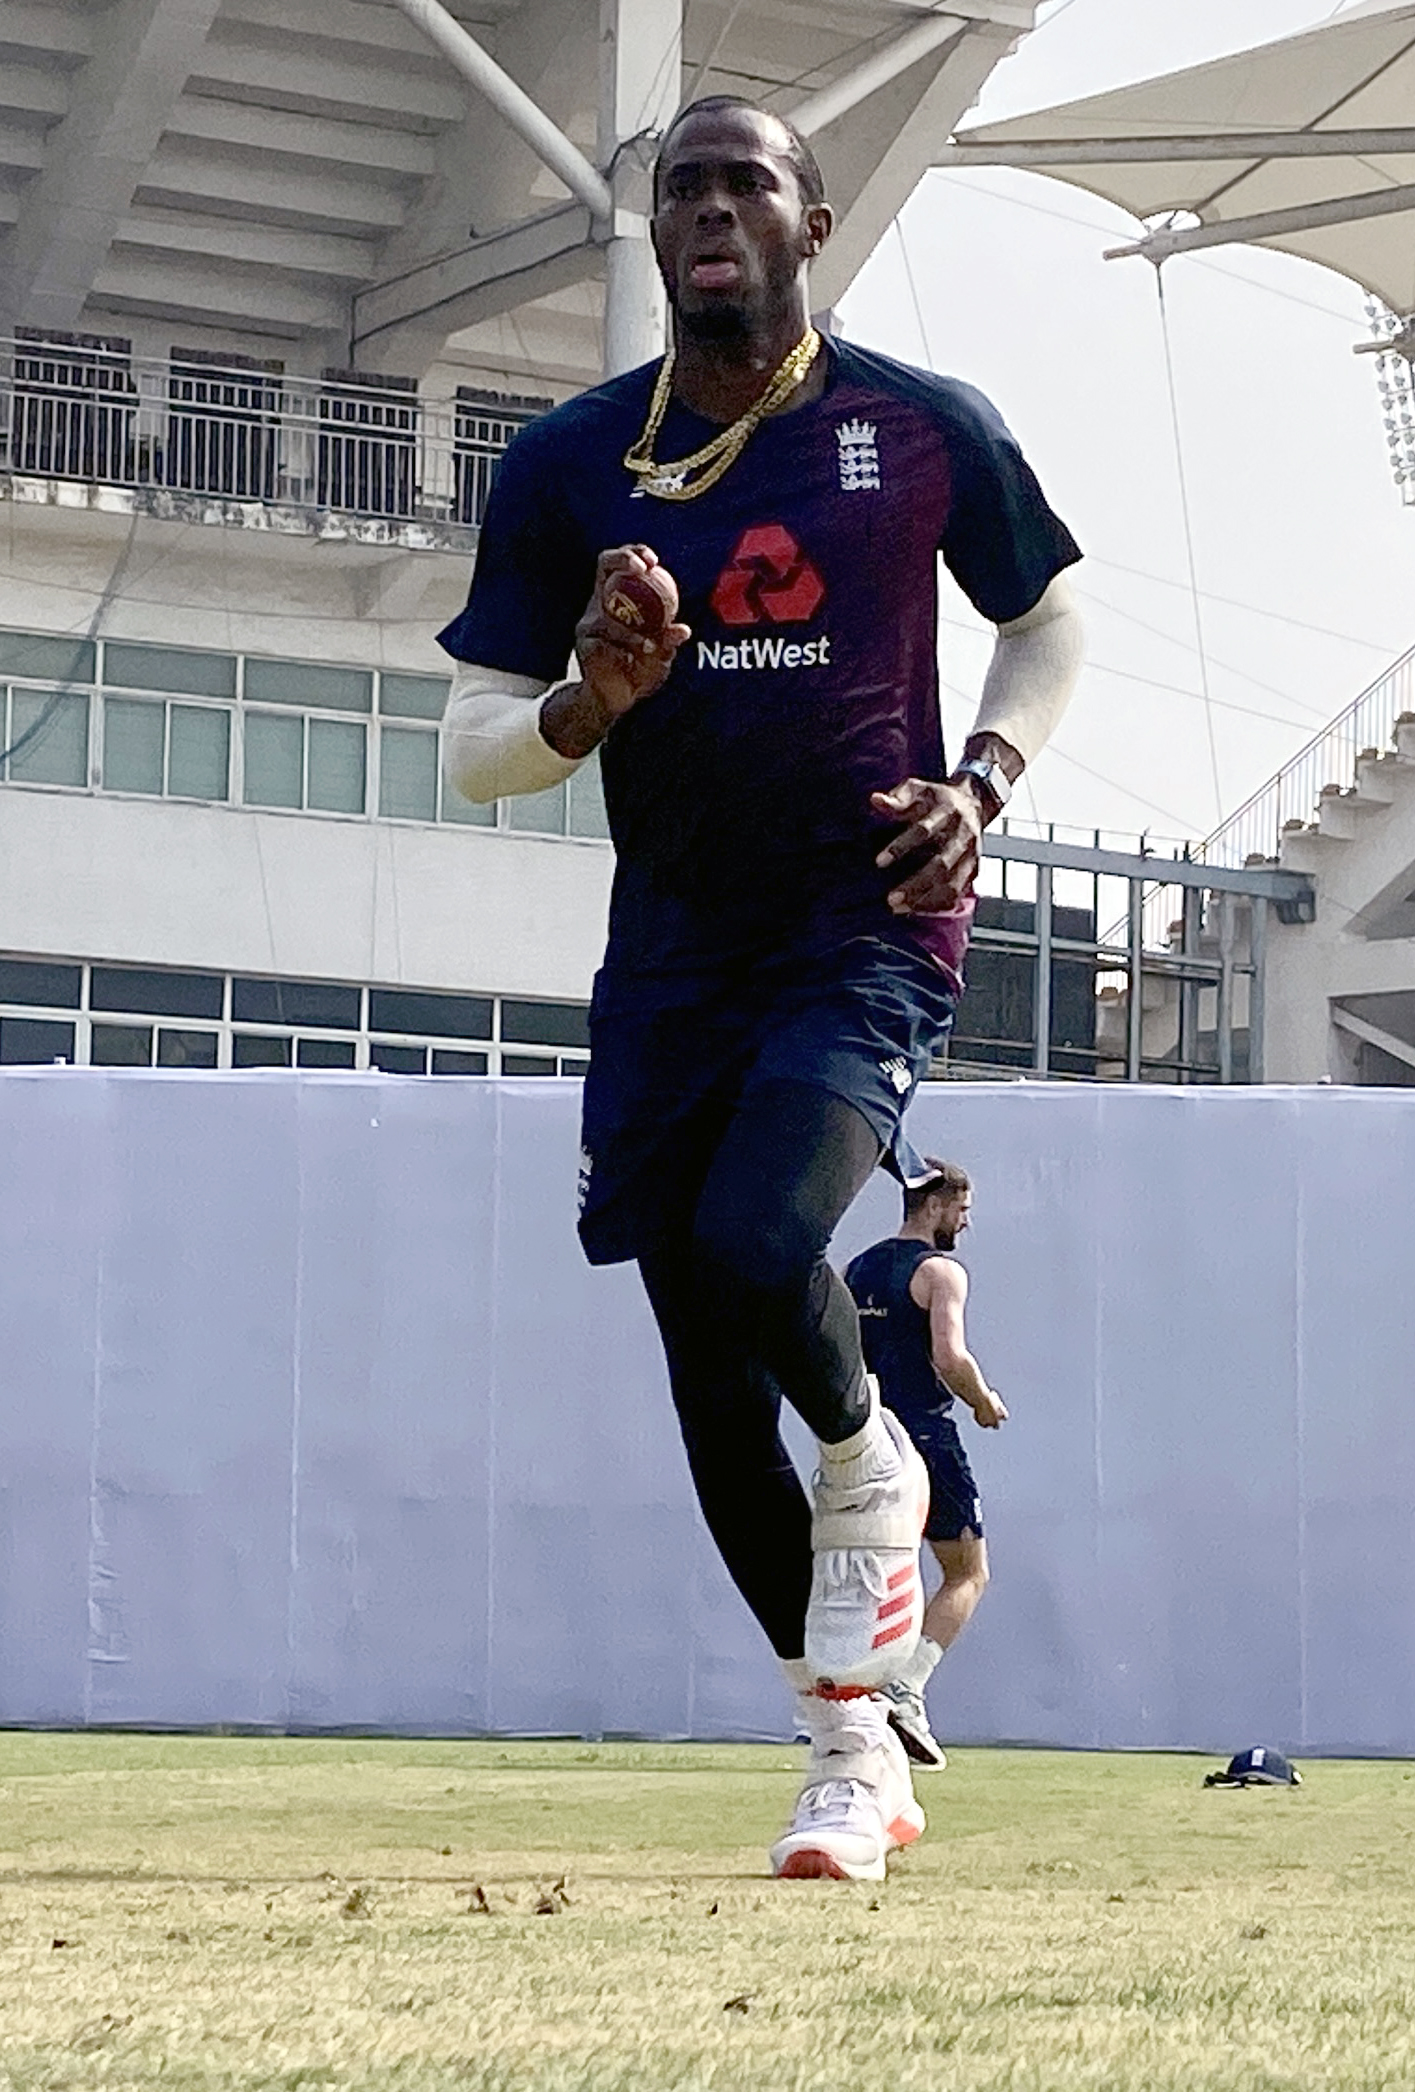 England pacer Jofra Archer ruled out of Ashes series